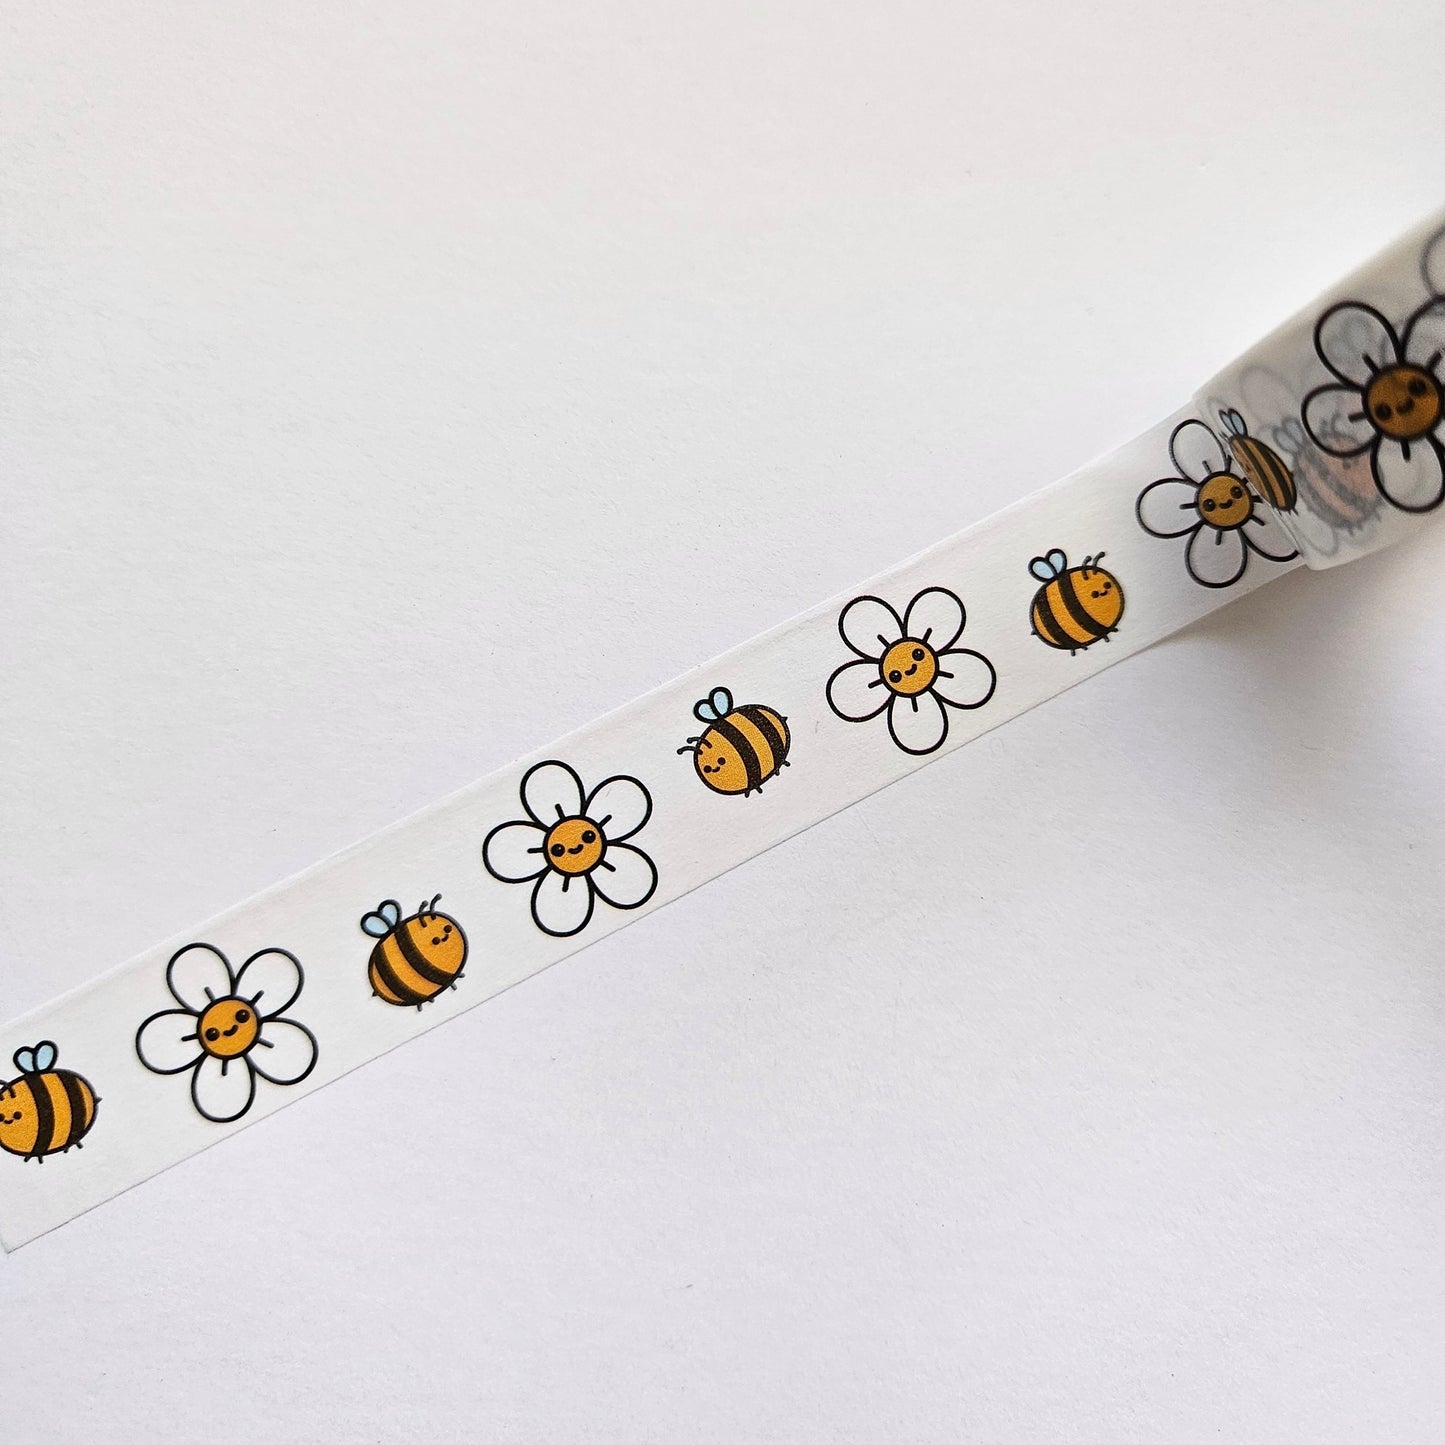 Busy Bee washi tape